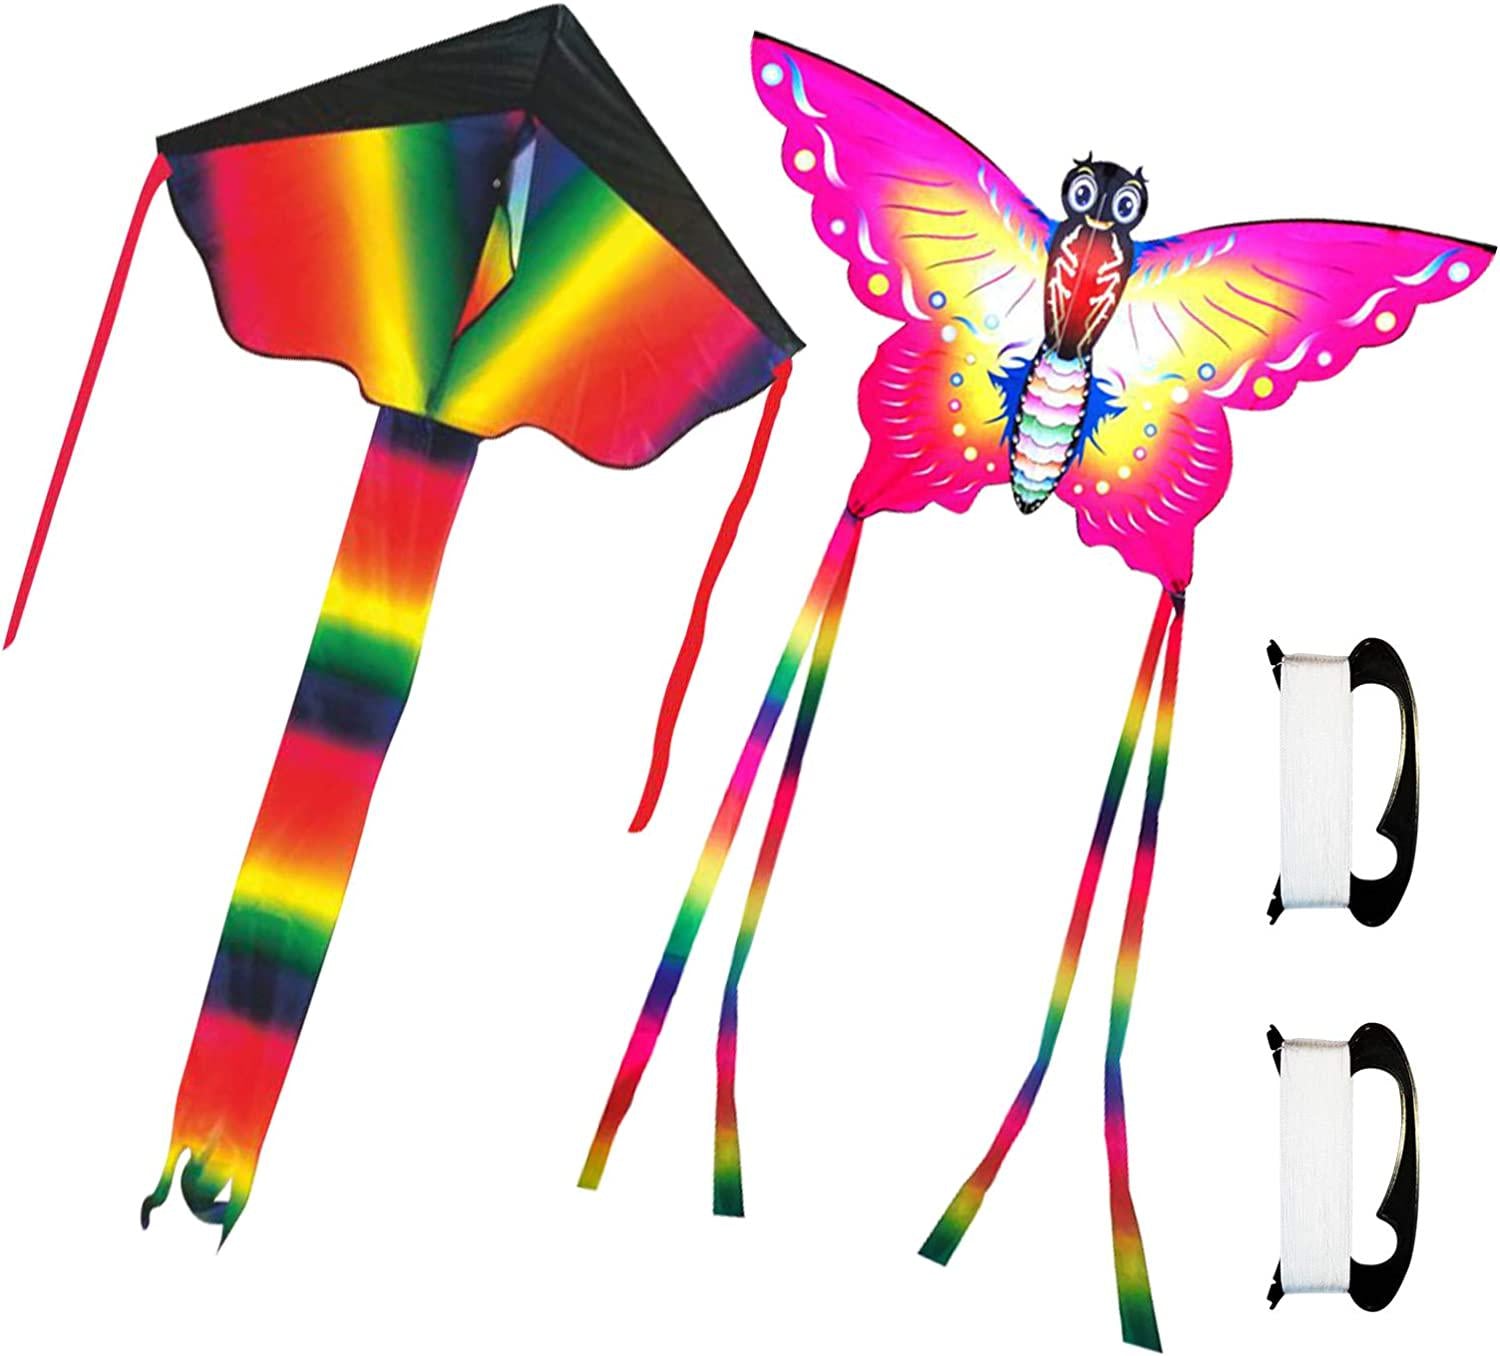 Lamonty, Lamonty 2 Pack Kites - Large Butterfly Kite and Black Rainbow for Children and Adult with Long Colorful Tail String Line Accessories Easy to Soar High Outdoor Sports Game Activities or Beach Trip